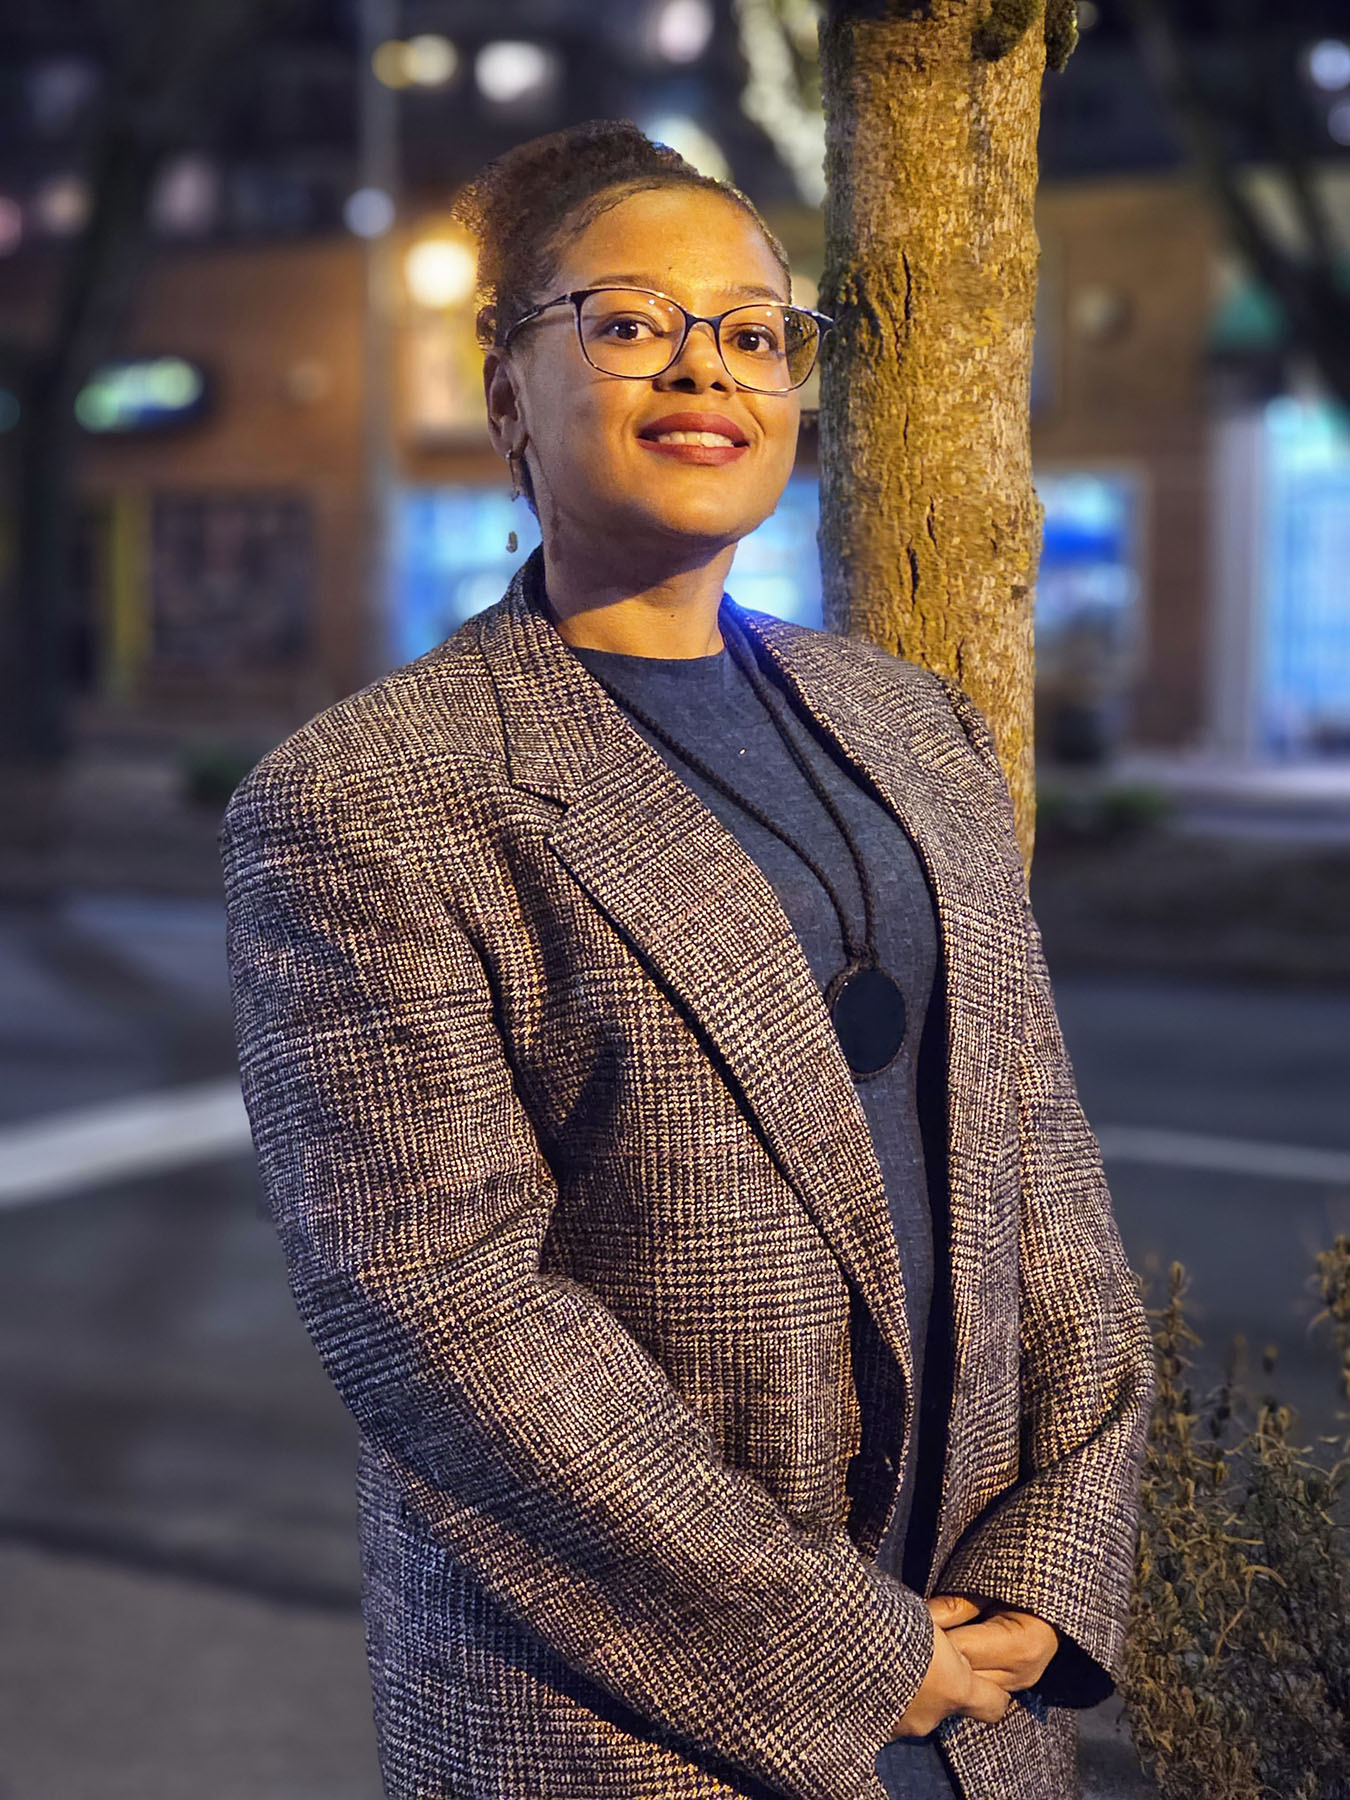 ChrisTiana ObeySumner smiles as she poses for a portrait at night.